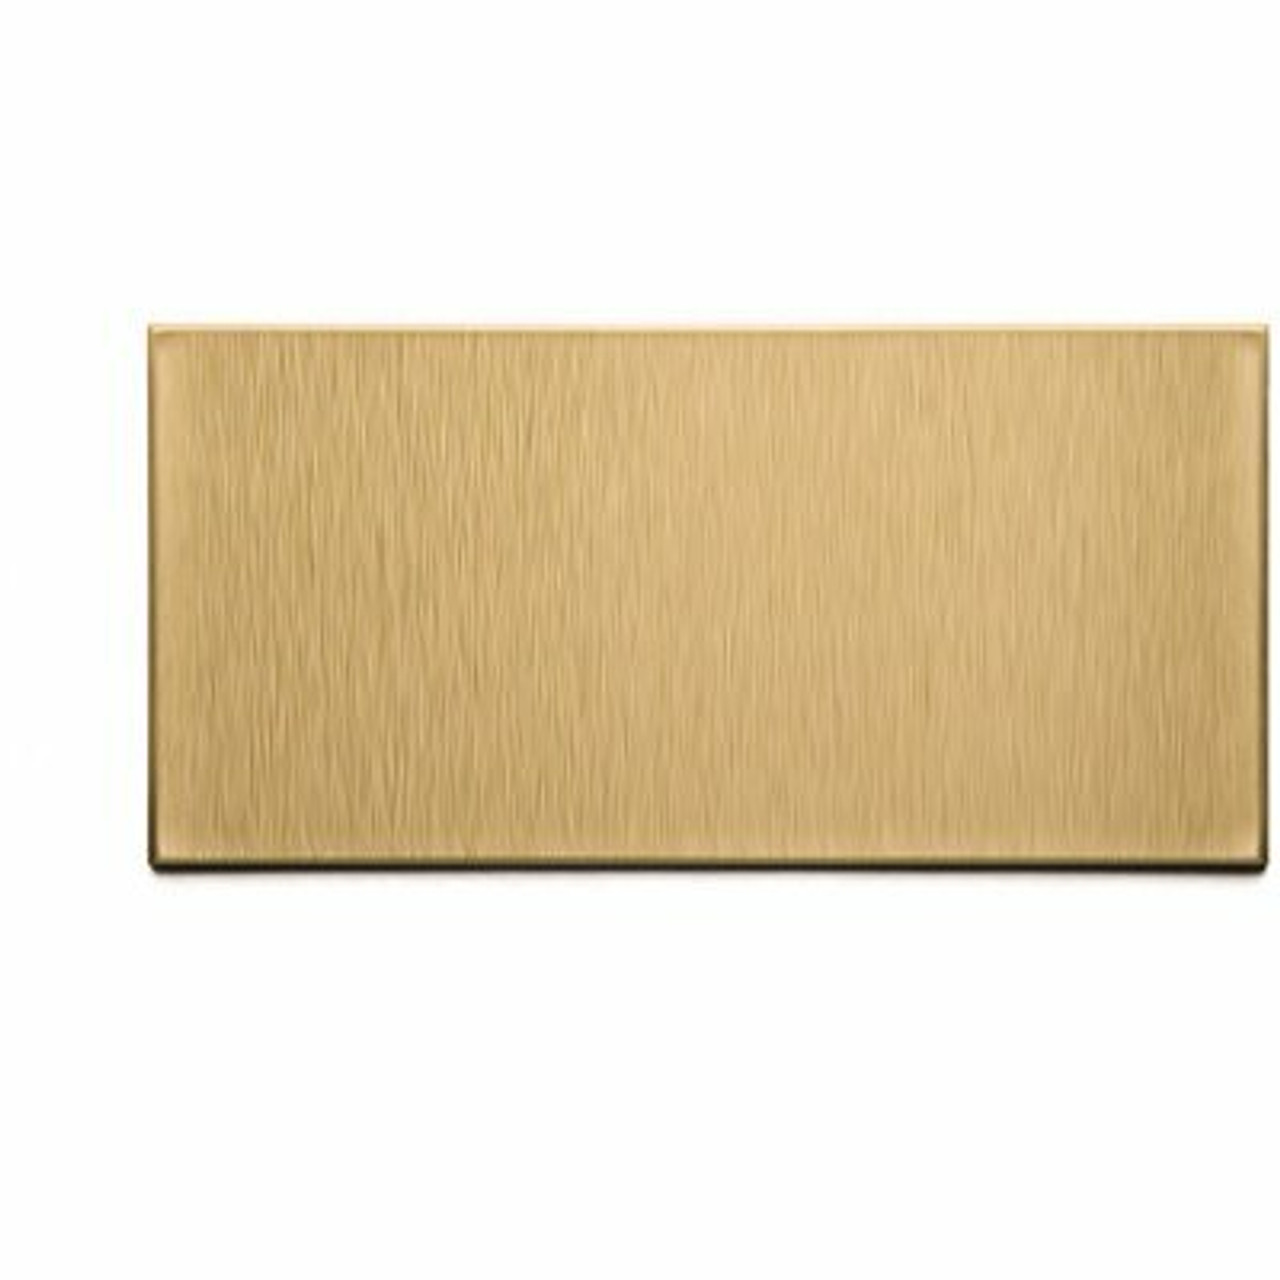 Aspect Short Grain 6 In. X 3 In. Brushed Champagne Metal Decorative Wall Tile (8-Pack)